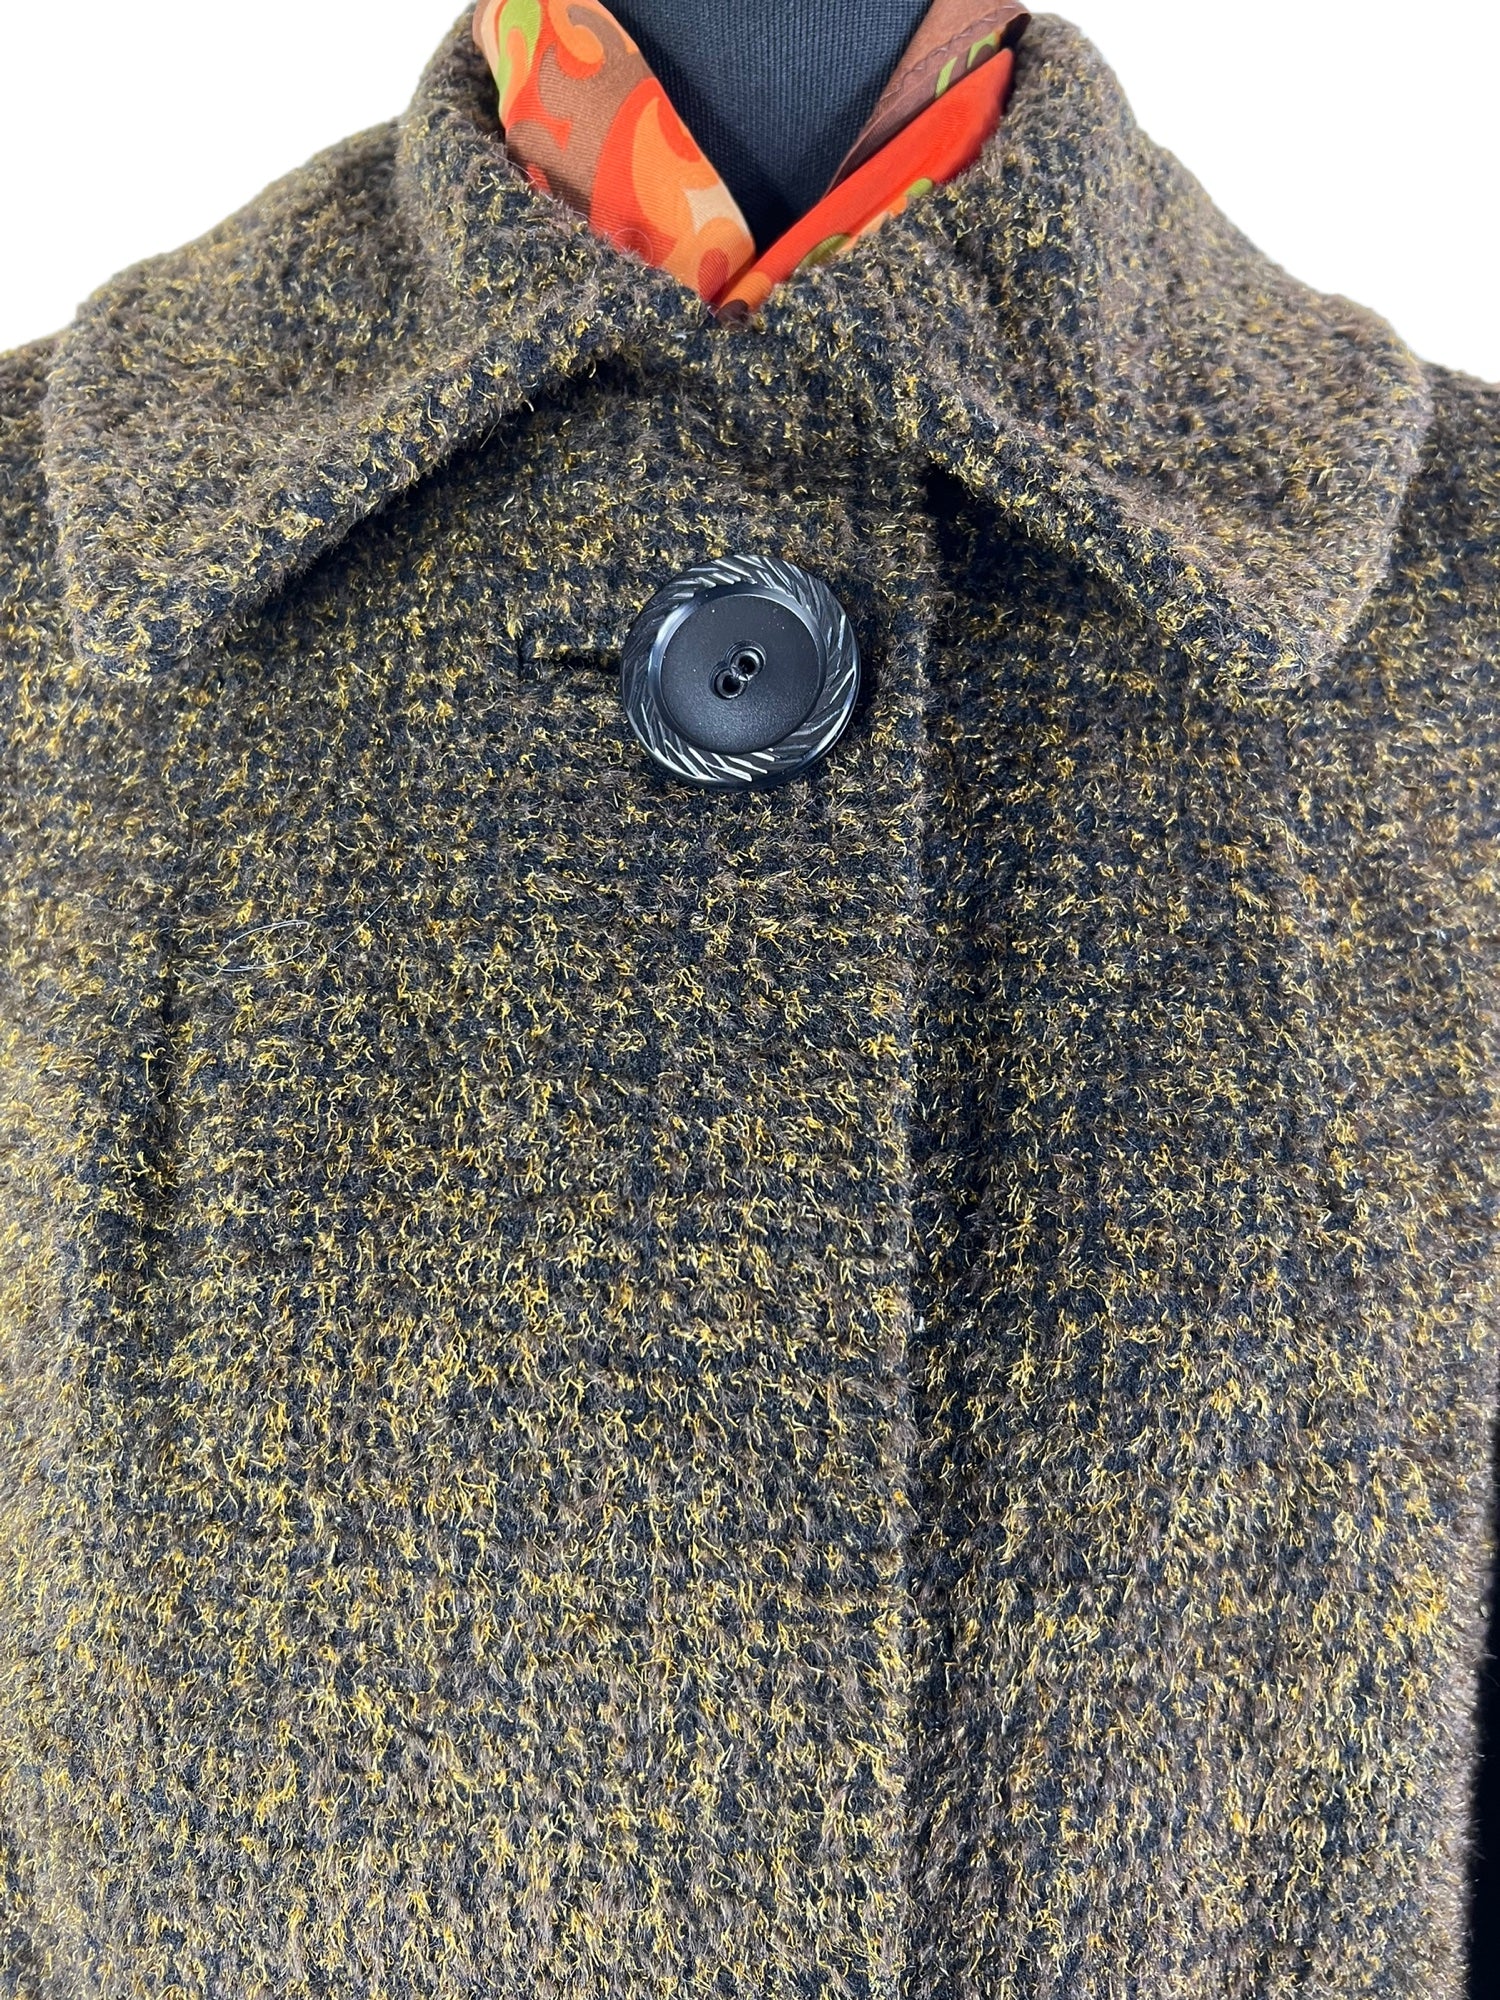 zero waste  wool  womens jacket  womens coat  womens  Winter Coat  Welsmere  vintage  Urban Village Vintage  urban village  UK  thrifted  thrift  sustainable  style  store  slow fashion  shop  second hand  save the planet  reuse  recycled  recycle  recycable  preloved  online  ladies  Jacket  fashion  ethical  Eco friendly  Eco  concious fashion  coat  clothing  clothes  button  brown  Birmingham  60s  50s  1960s  1950s  16